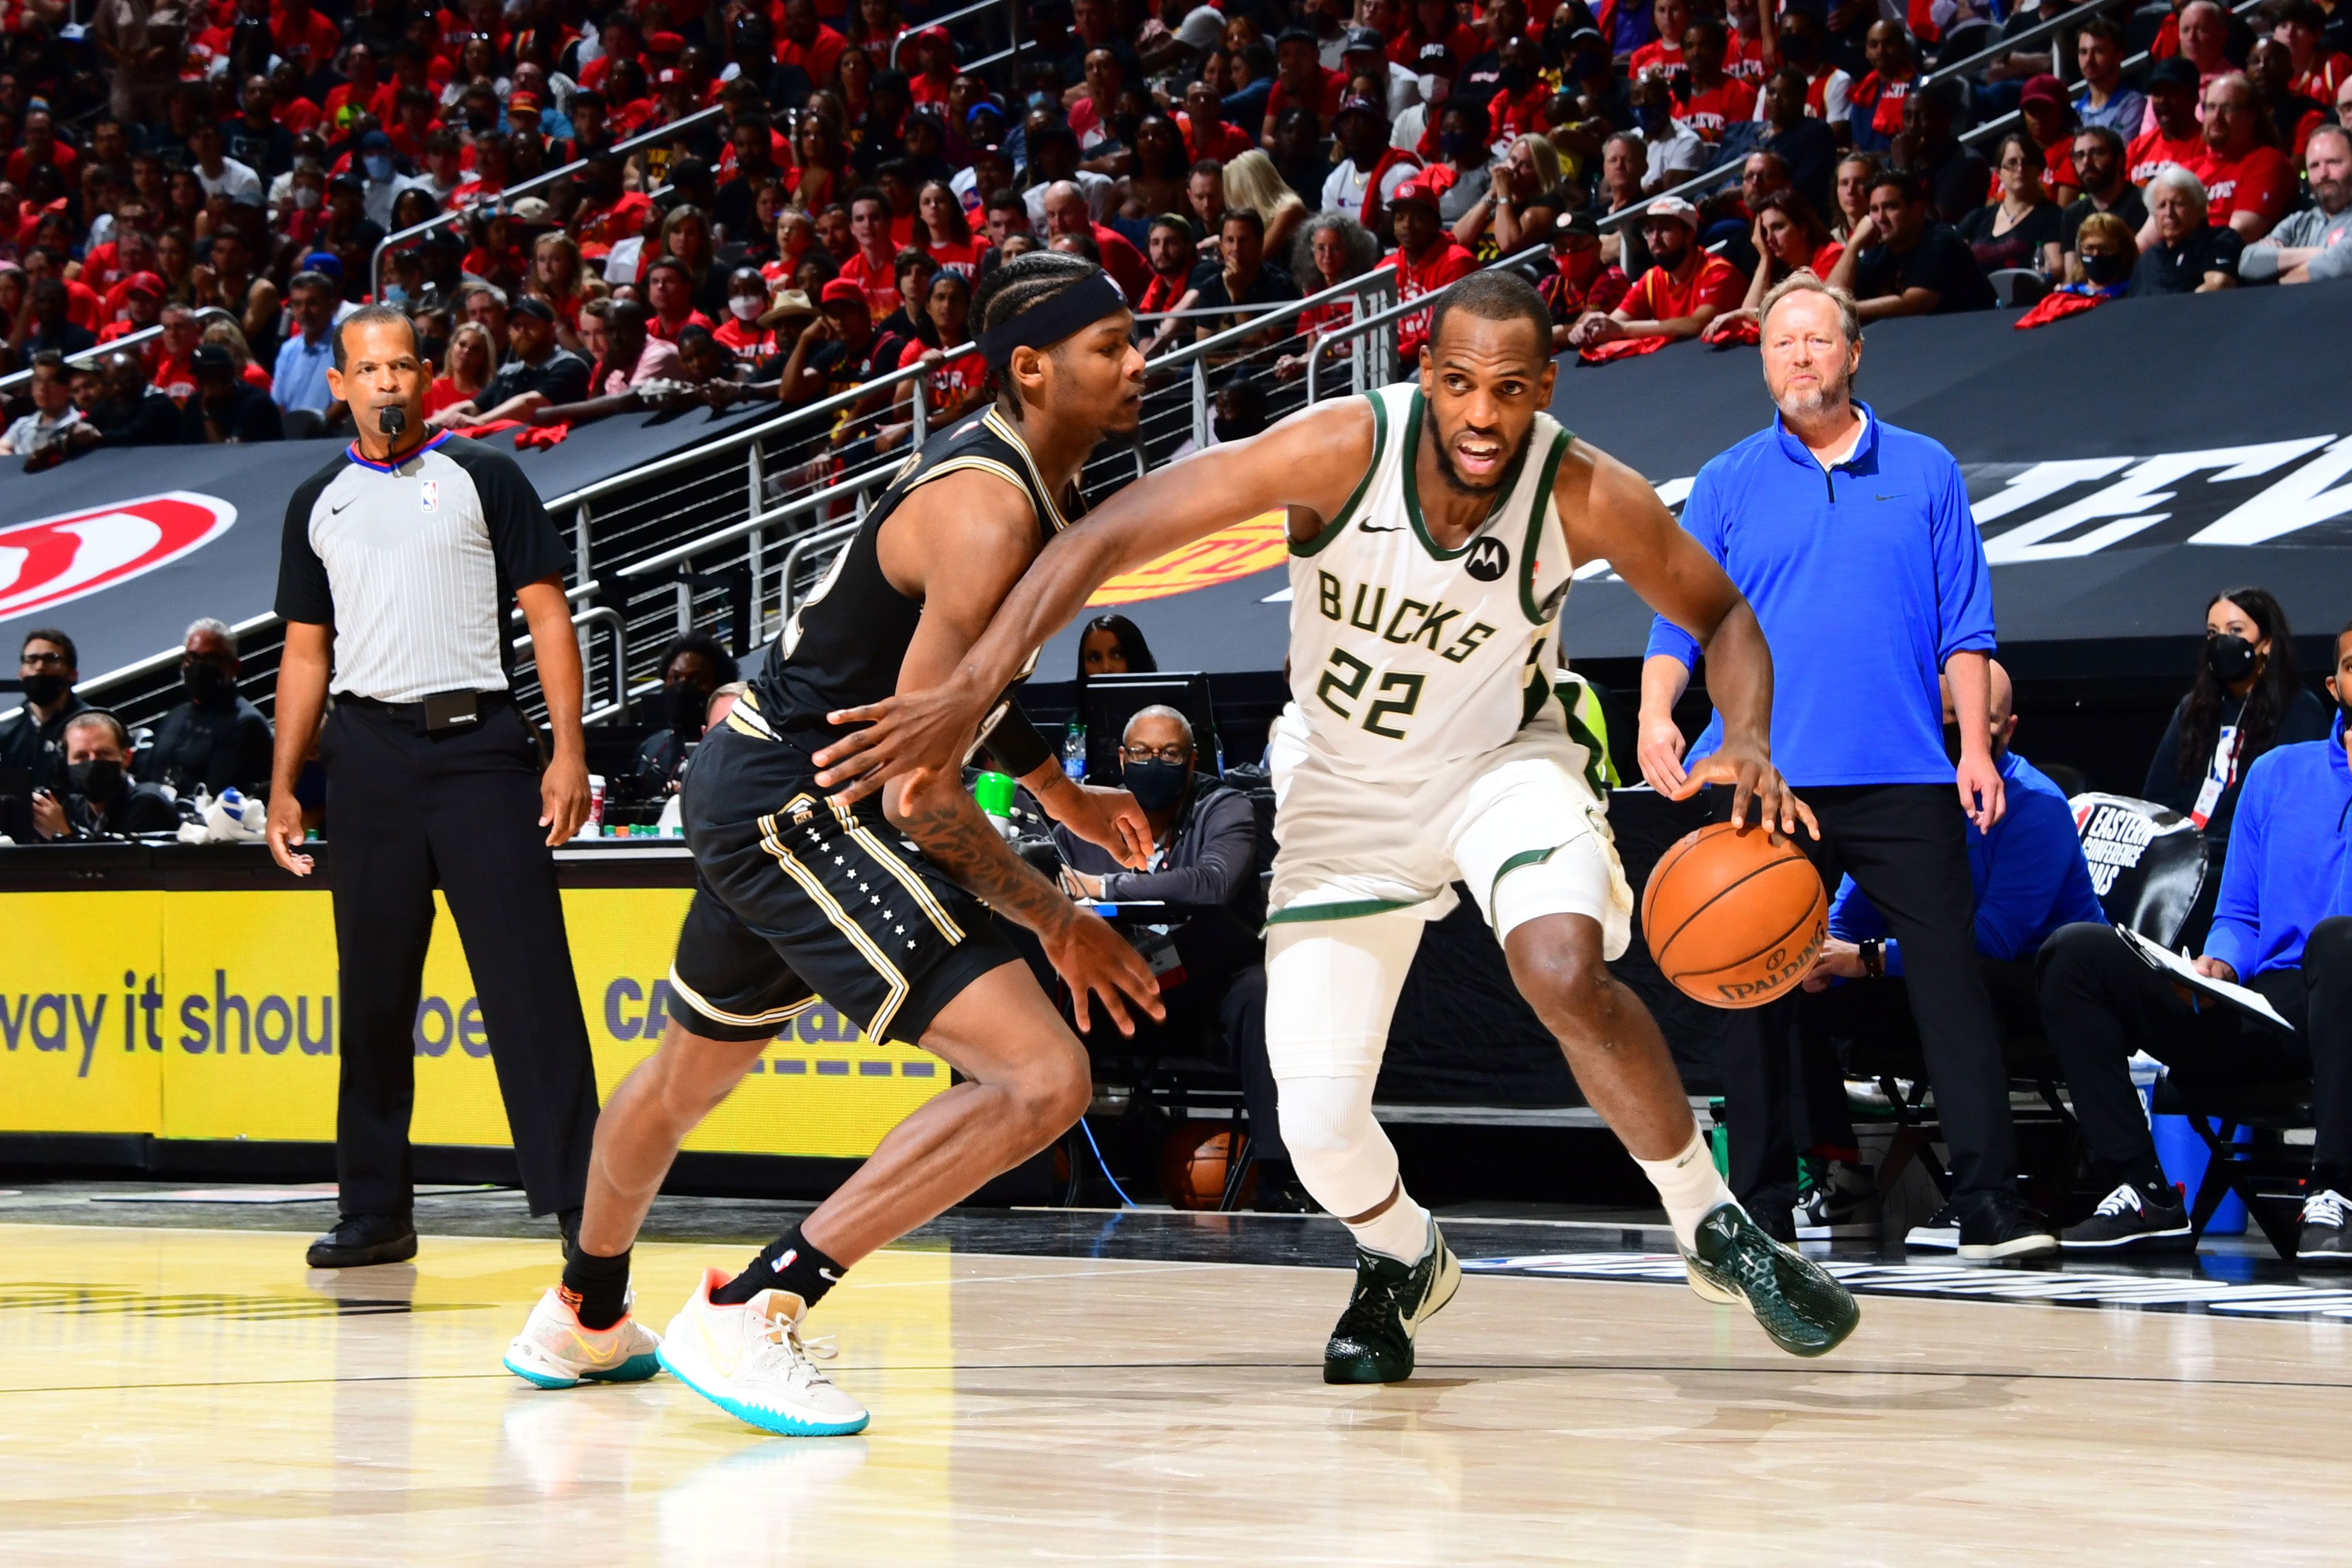 Khris MIddleton Profile: Bucks Forward Coming Into His Own As A Leader